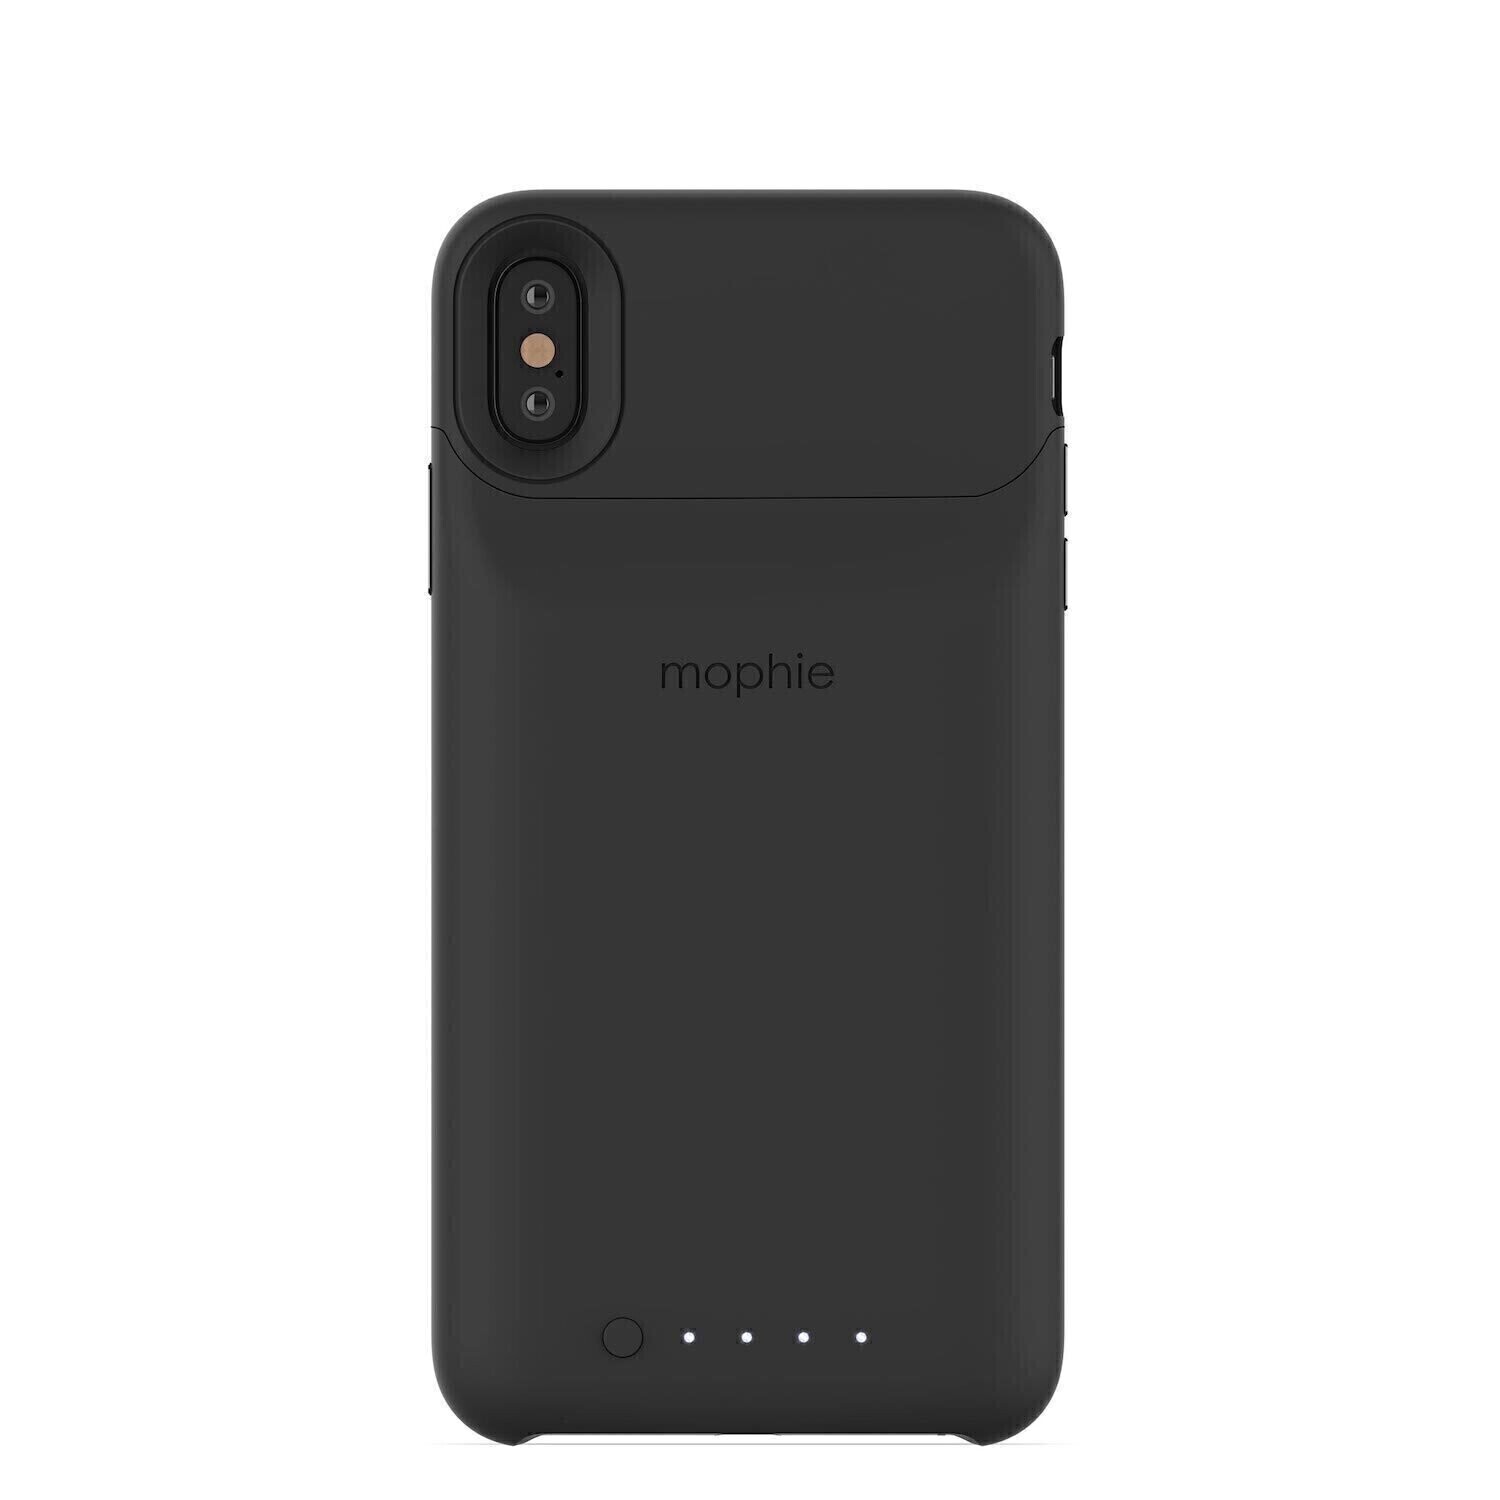 Mophie iPhone Xs Max 6.5" Juice Pack Access Battery Case (2,200mAh), Black